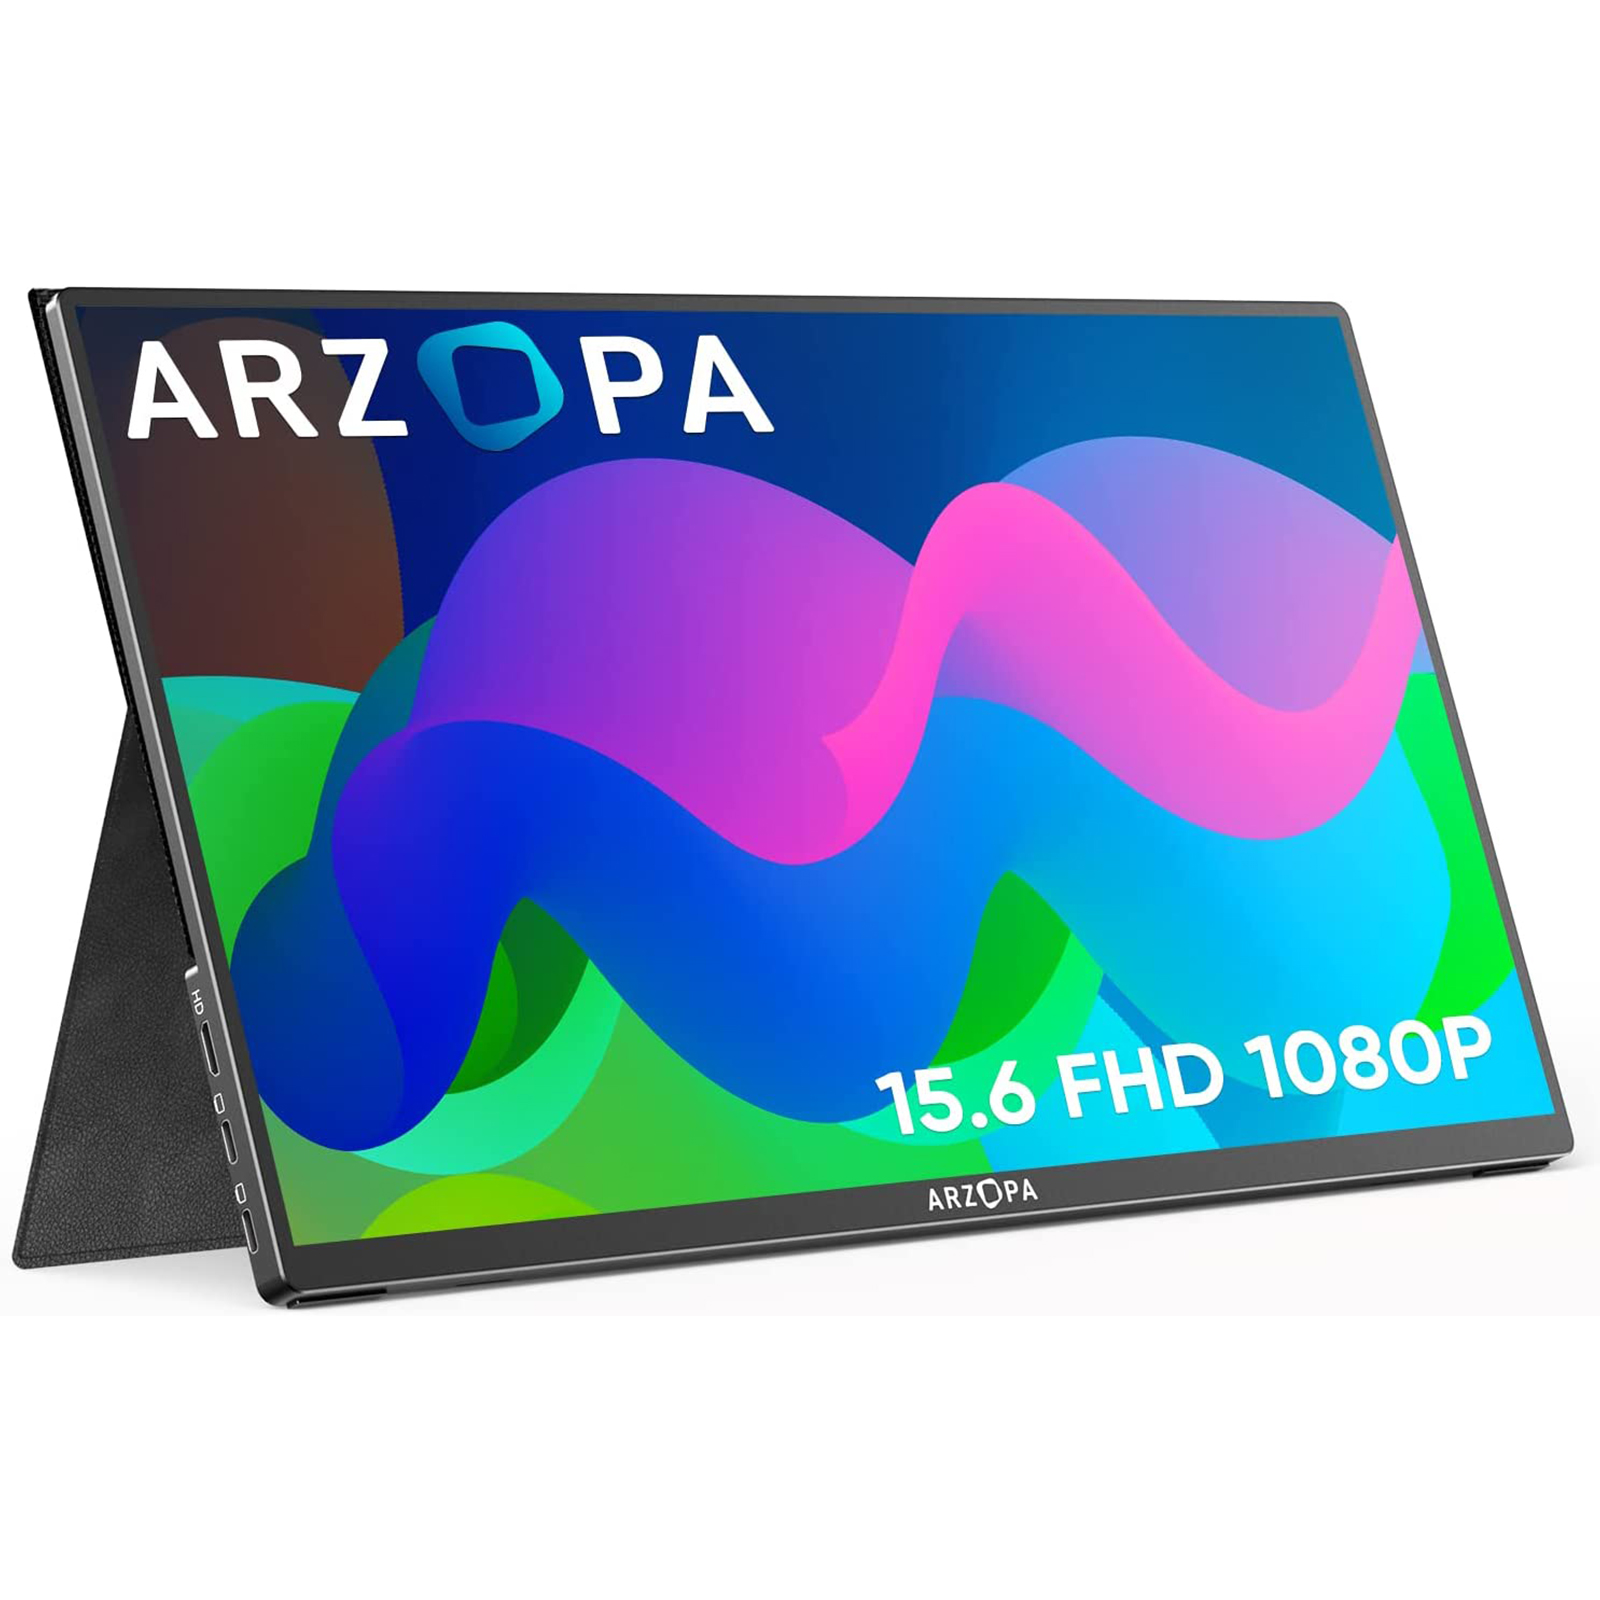 Arzopa Portable Monitor 17.3 Inch, 1080P FHD HDR IPS Laptop